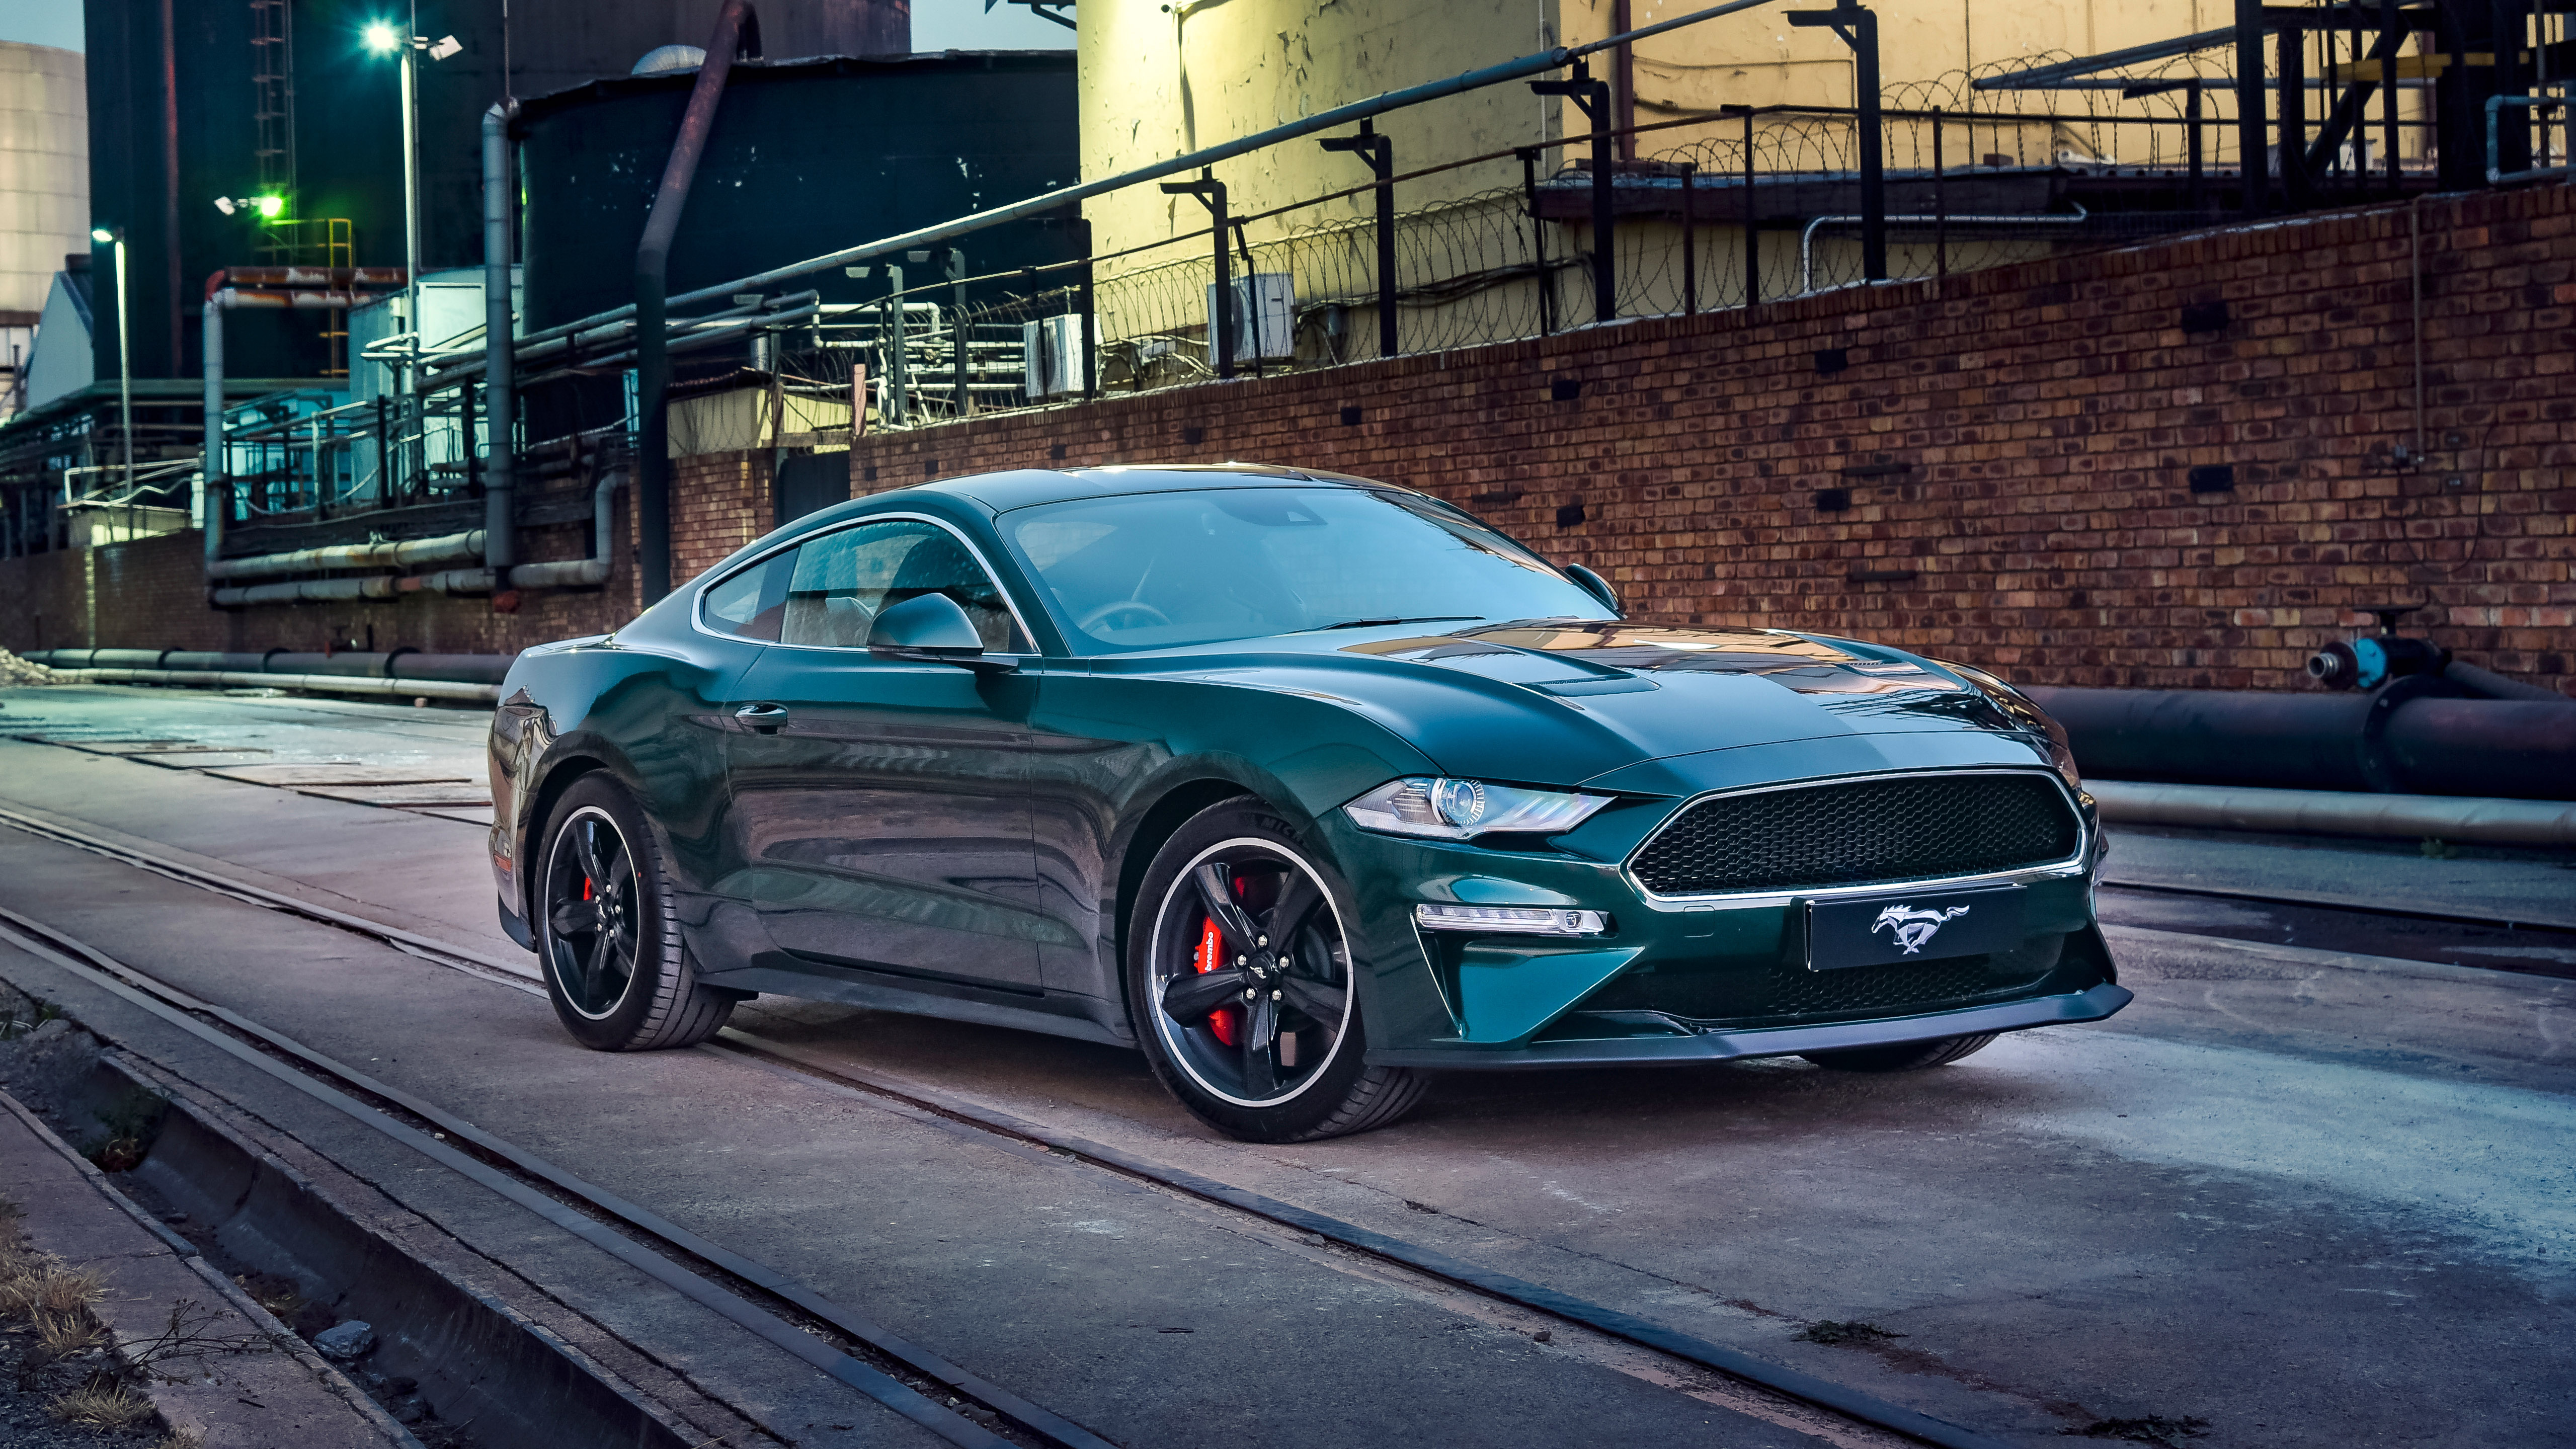 Ford Mustang GT Fastback RSPEC 2019 4K Wallpapers  HD Wallpapers  ID  29447